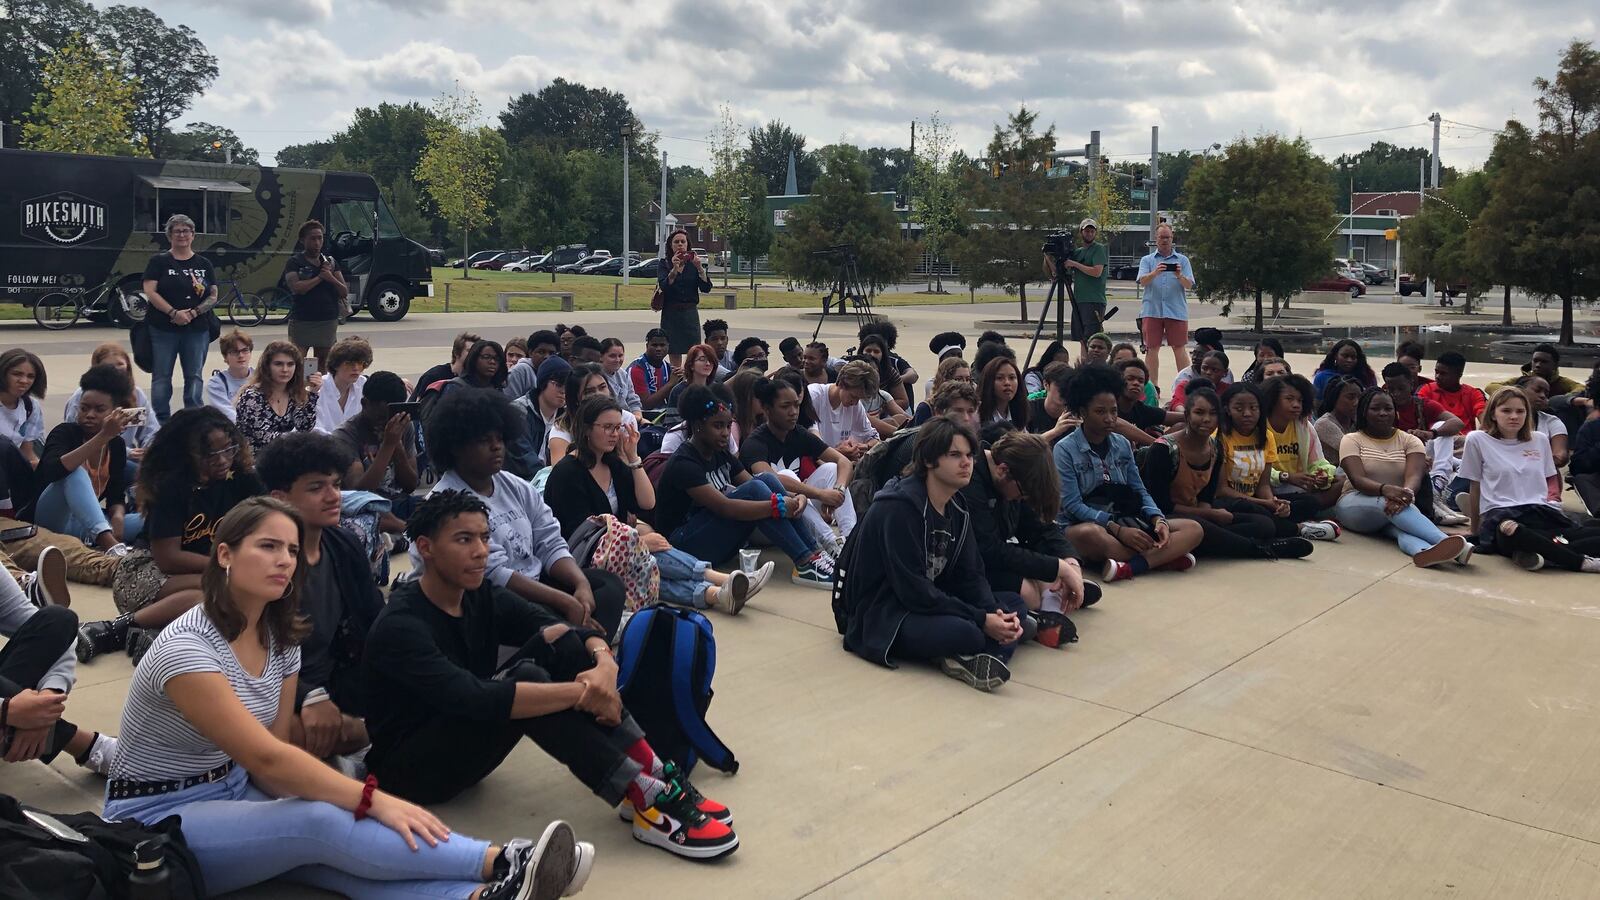 About 80 students at a Memphis high school left their classrooms Friday morning to protest changes at the school.